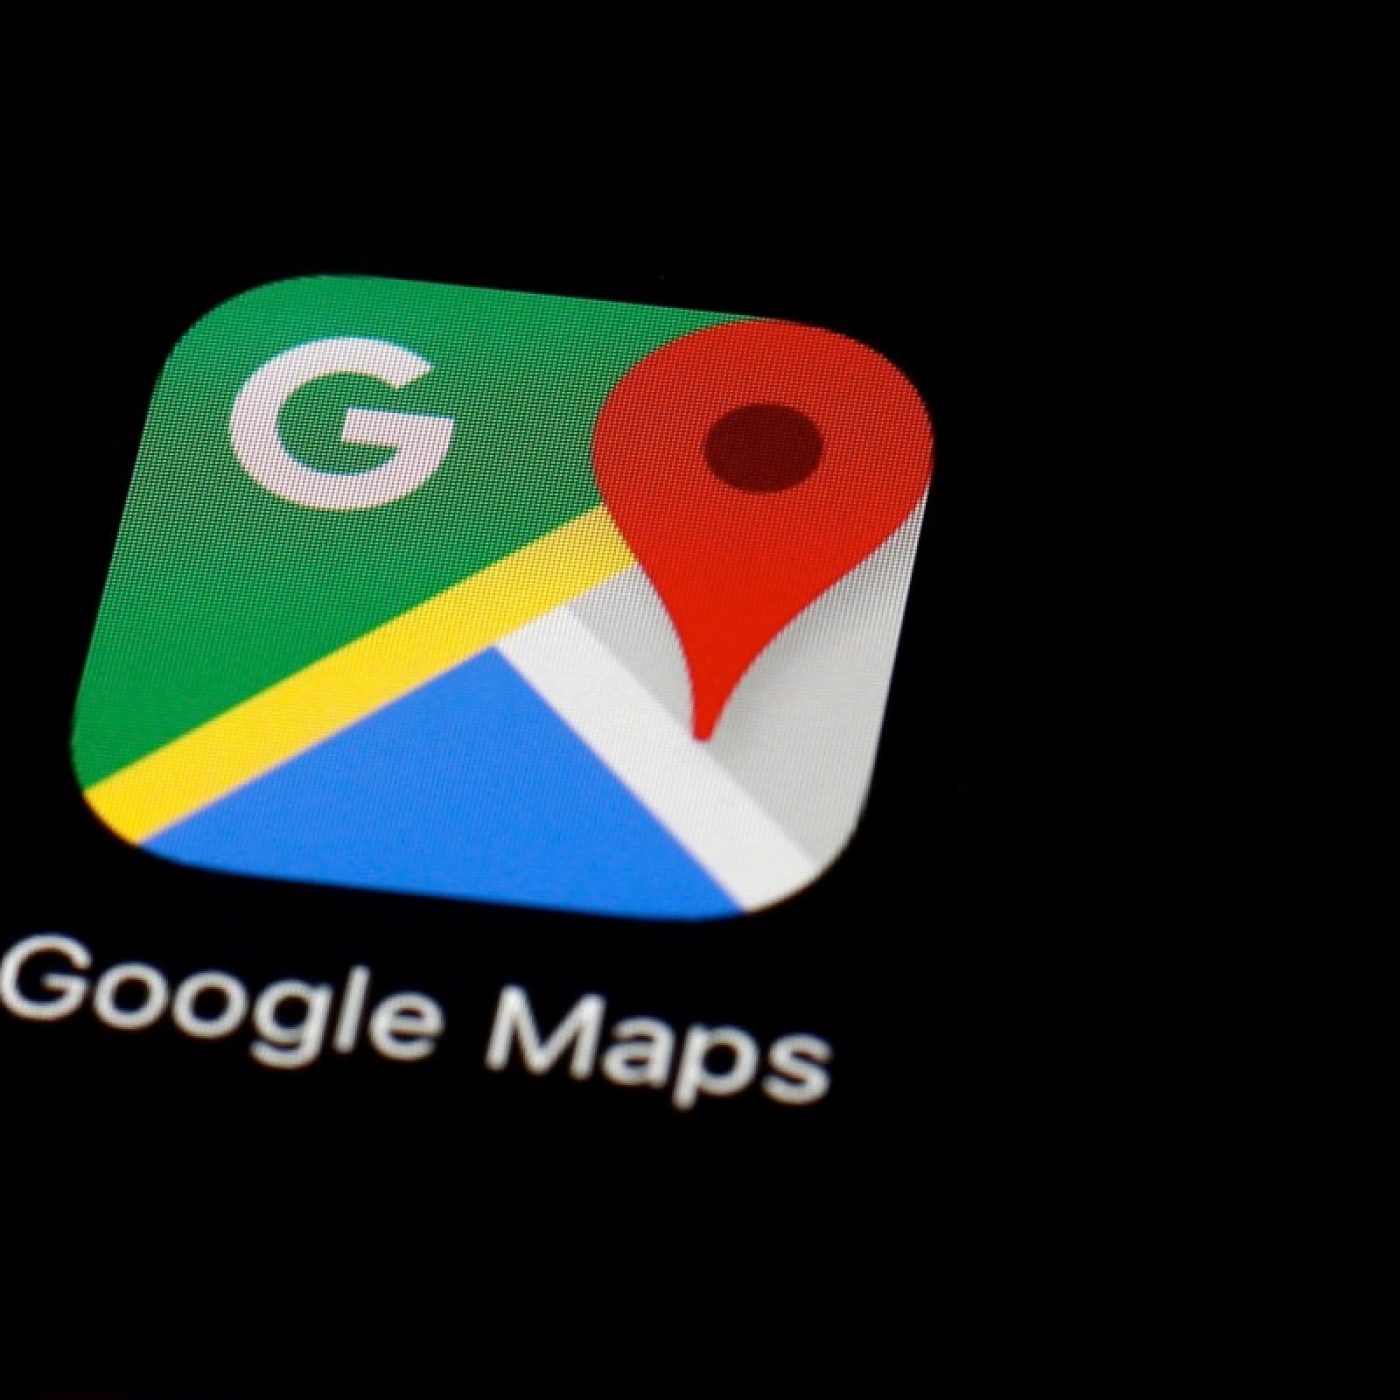 Google Maps Launches A New Feature To Help The Visually Impaired